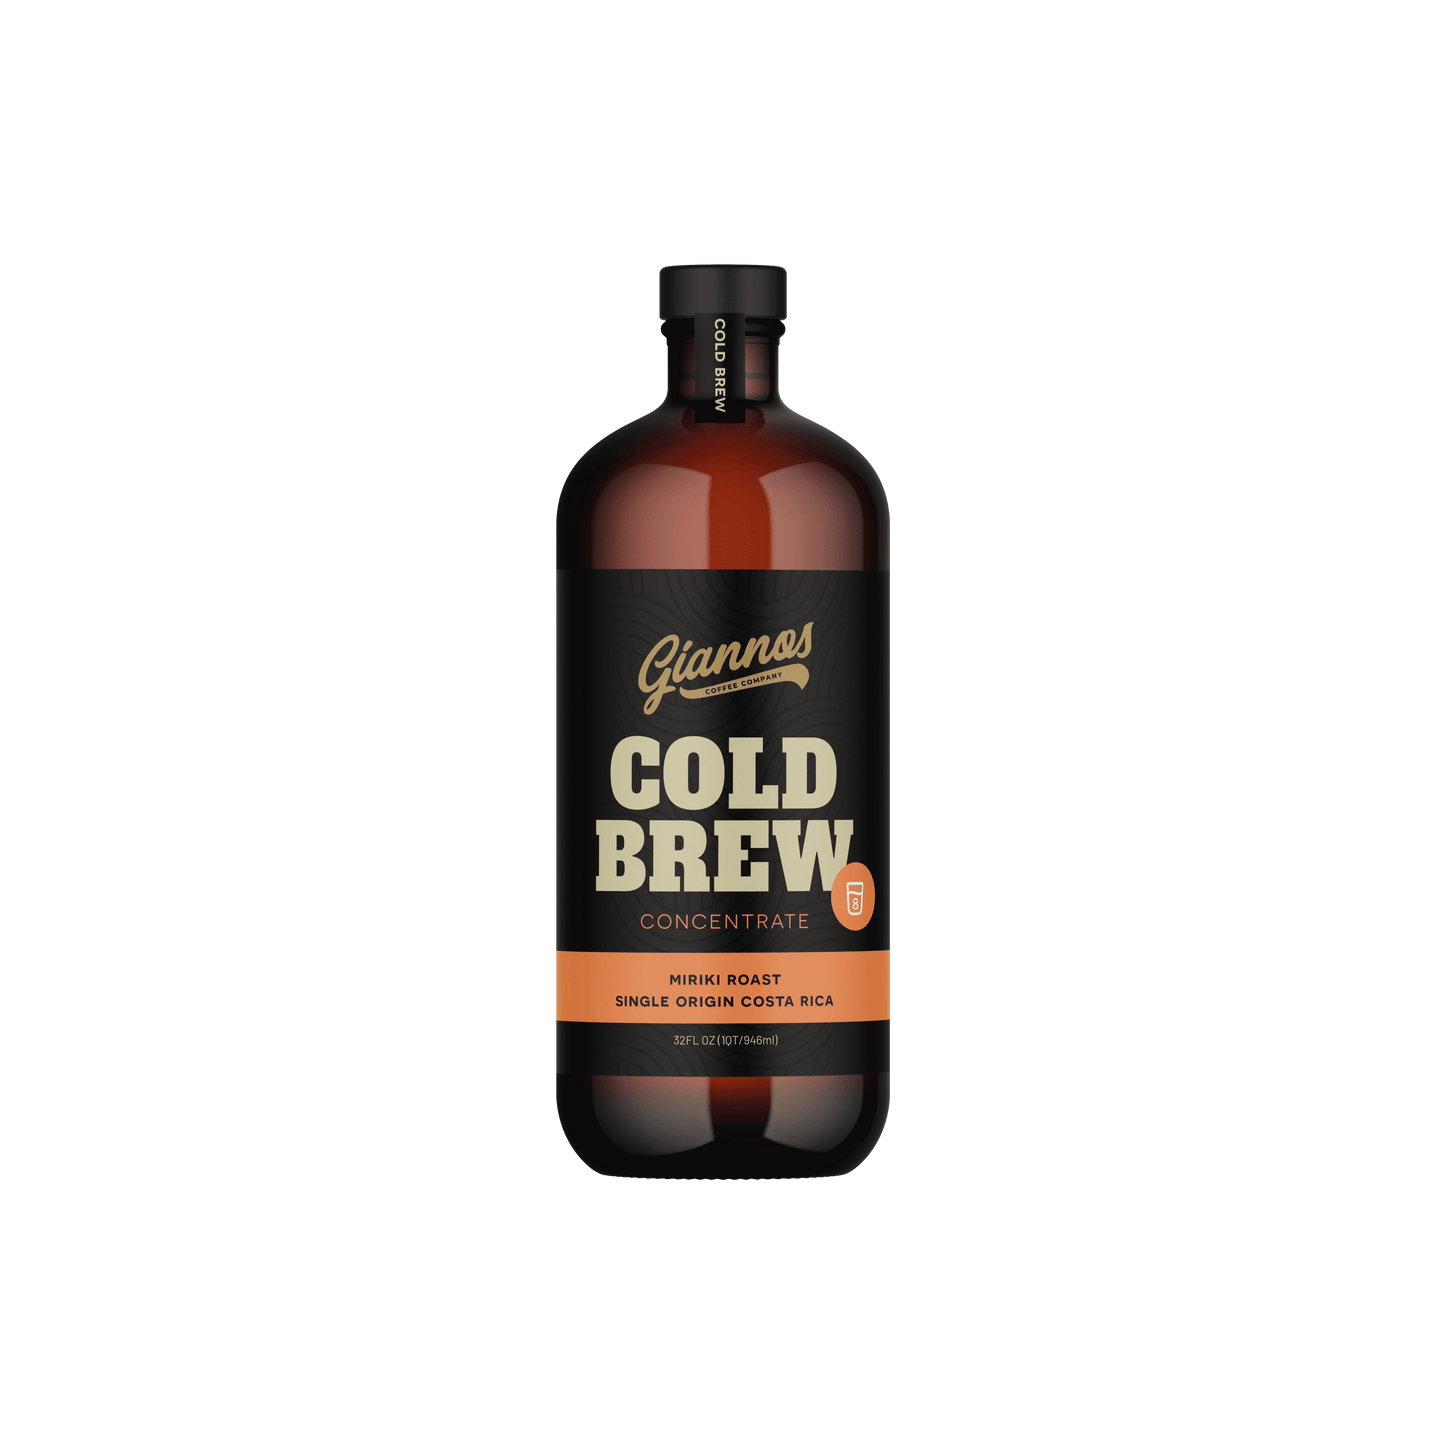 Cold Brew Concentrate Miriki Roast